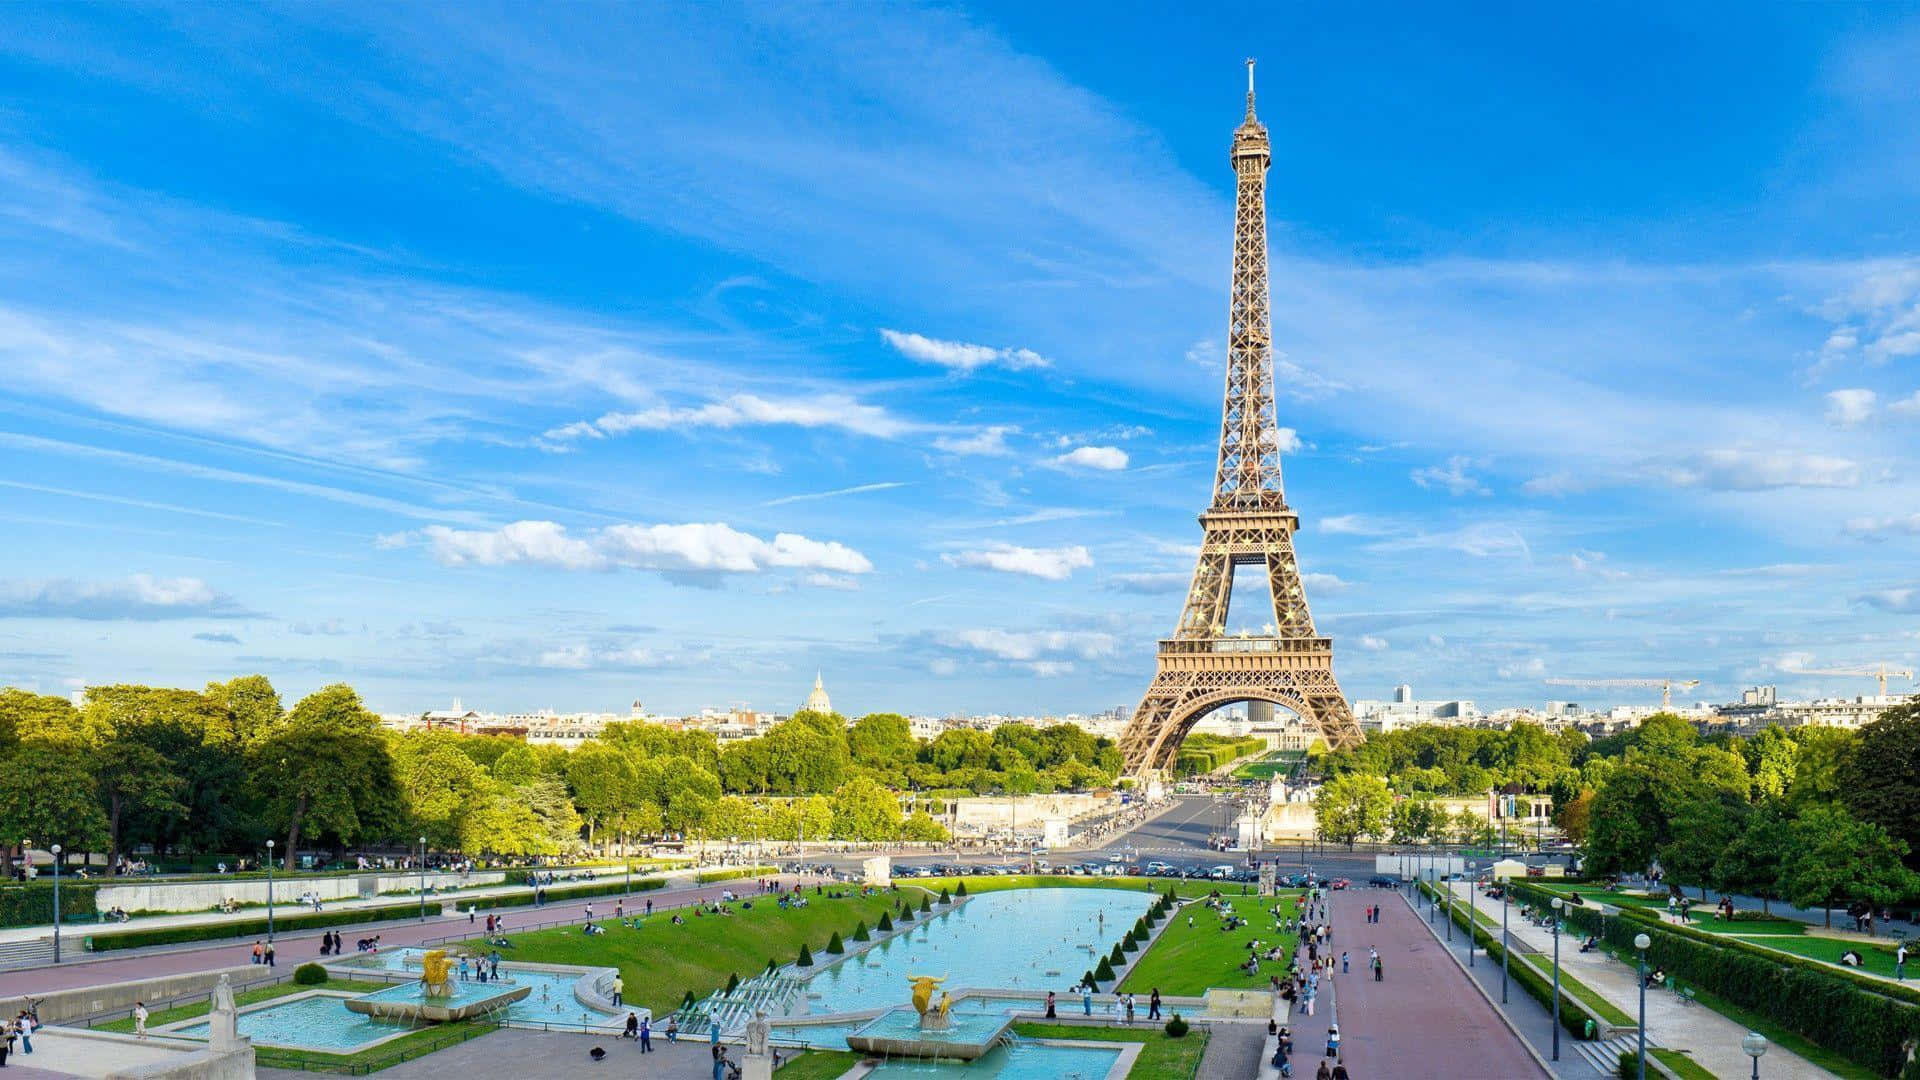 The Eiffel Tower in Paris, a symbol of French culture and tradition.